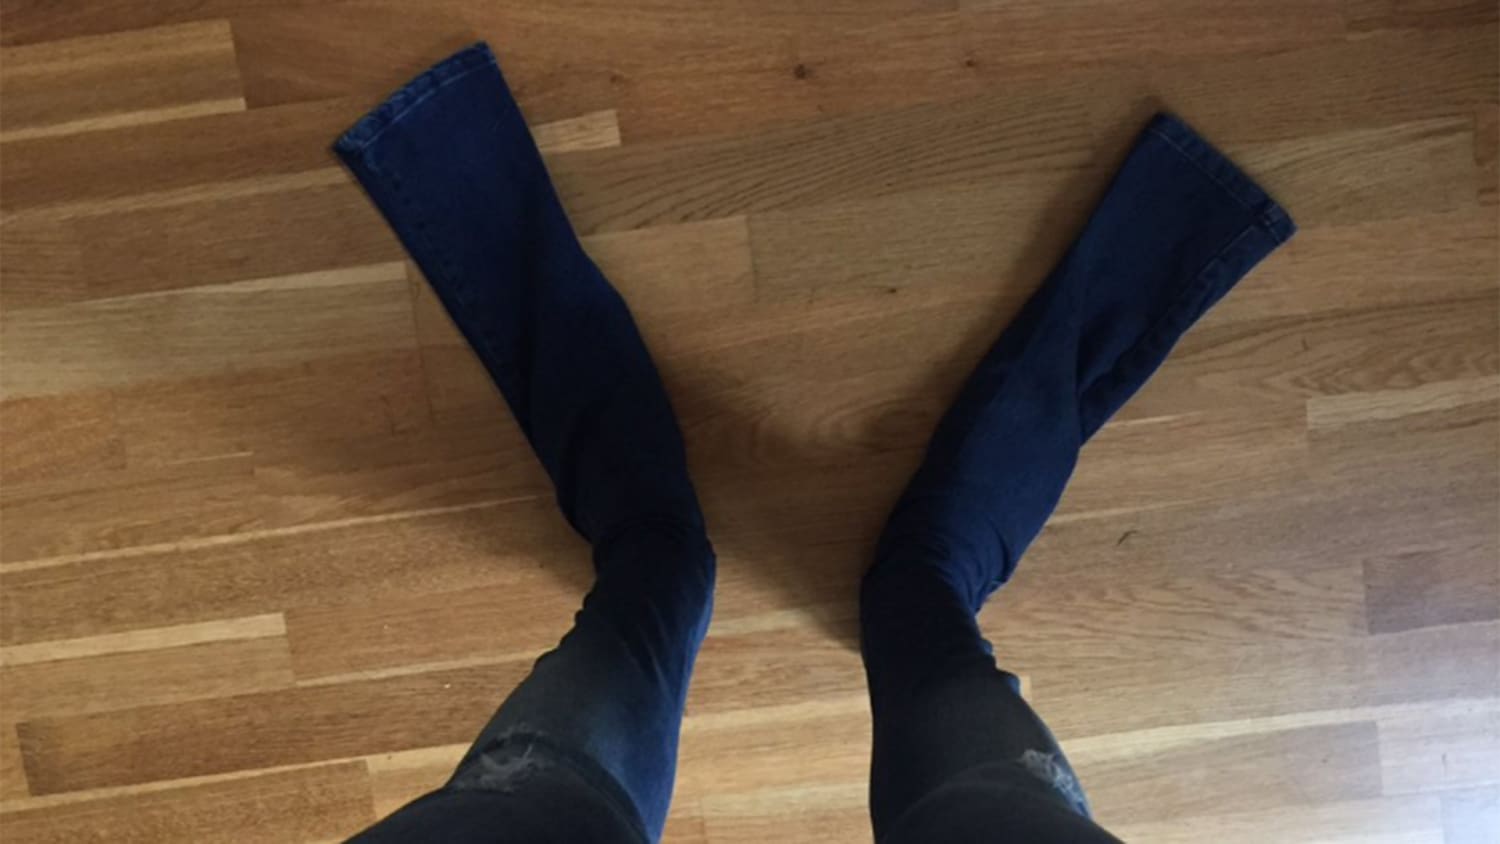 Company ridiculed for sending absurdly long jeans